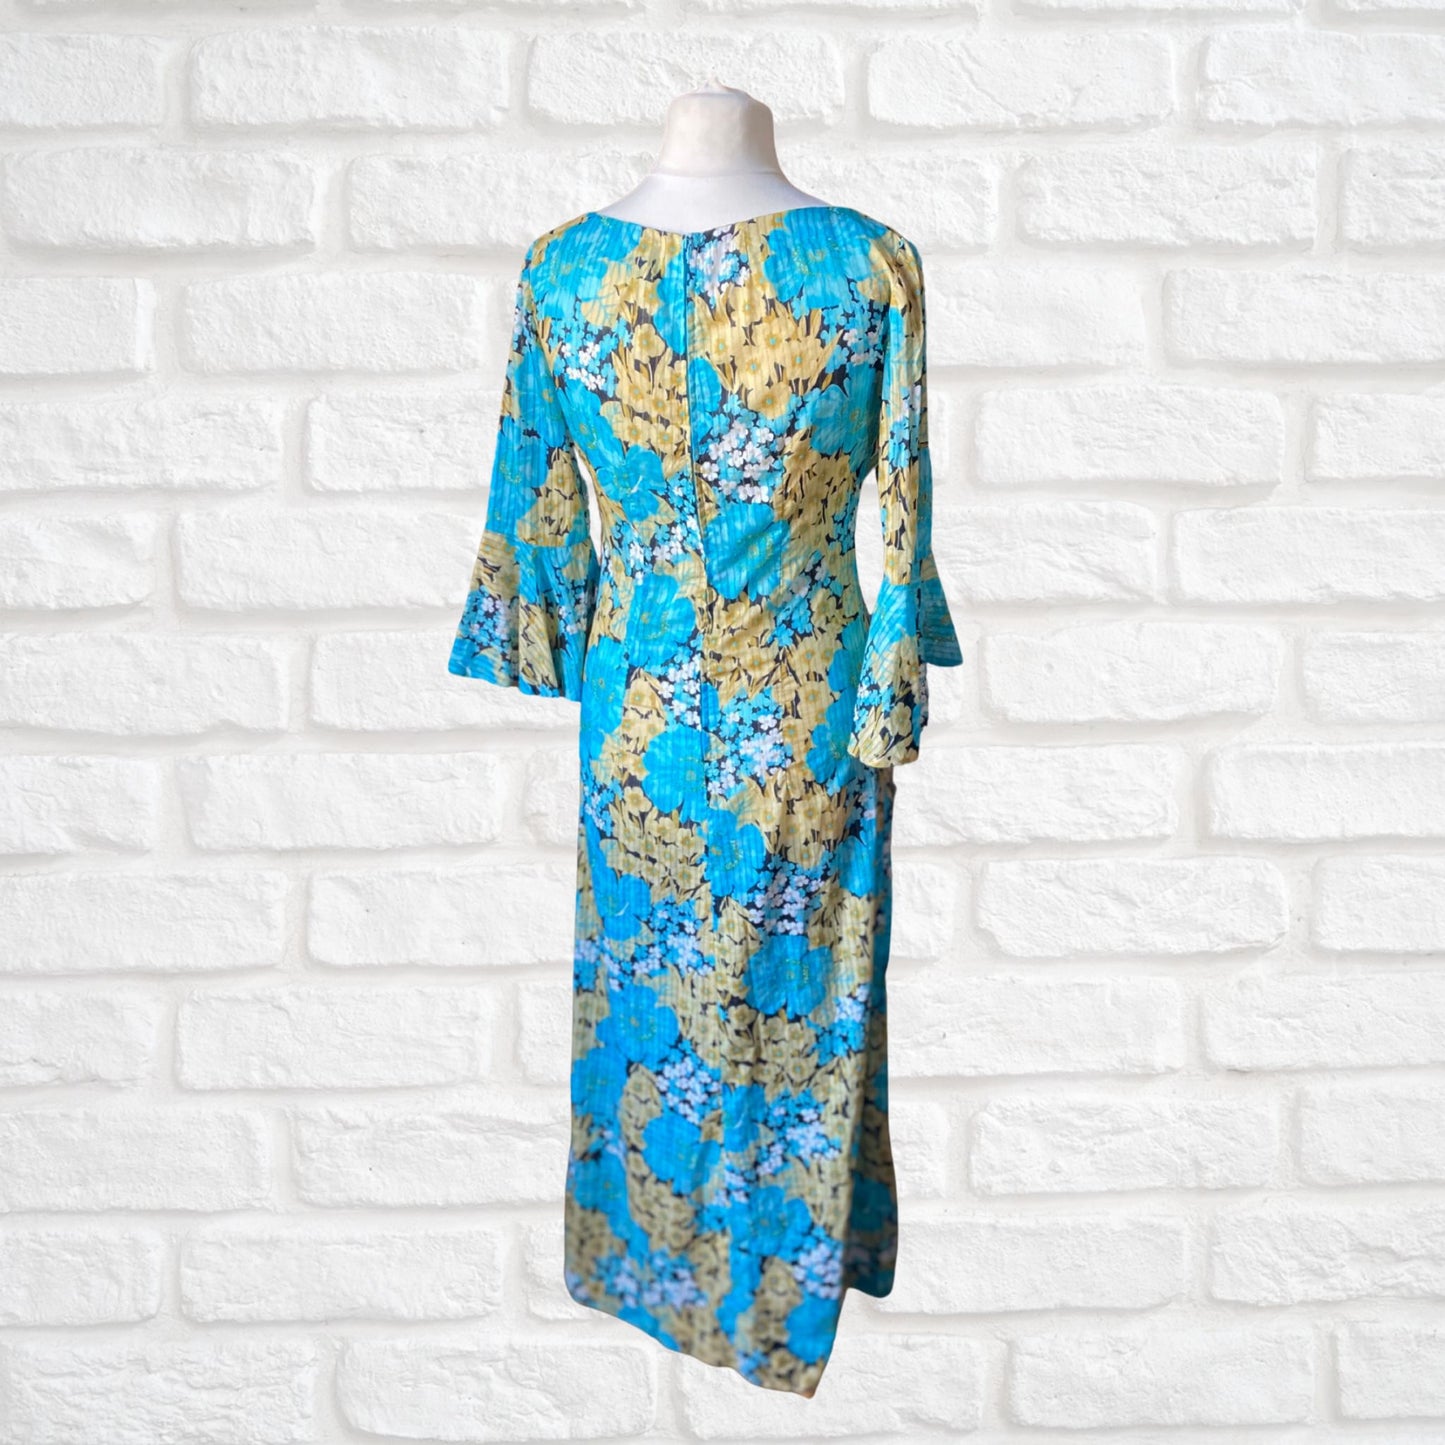 70s floaty blue and yellow floral maxi dress with flared sleeves  . Approx  UK size 14